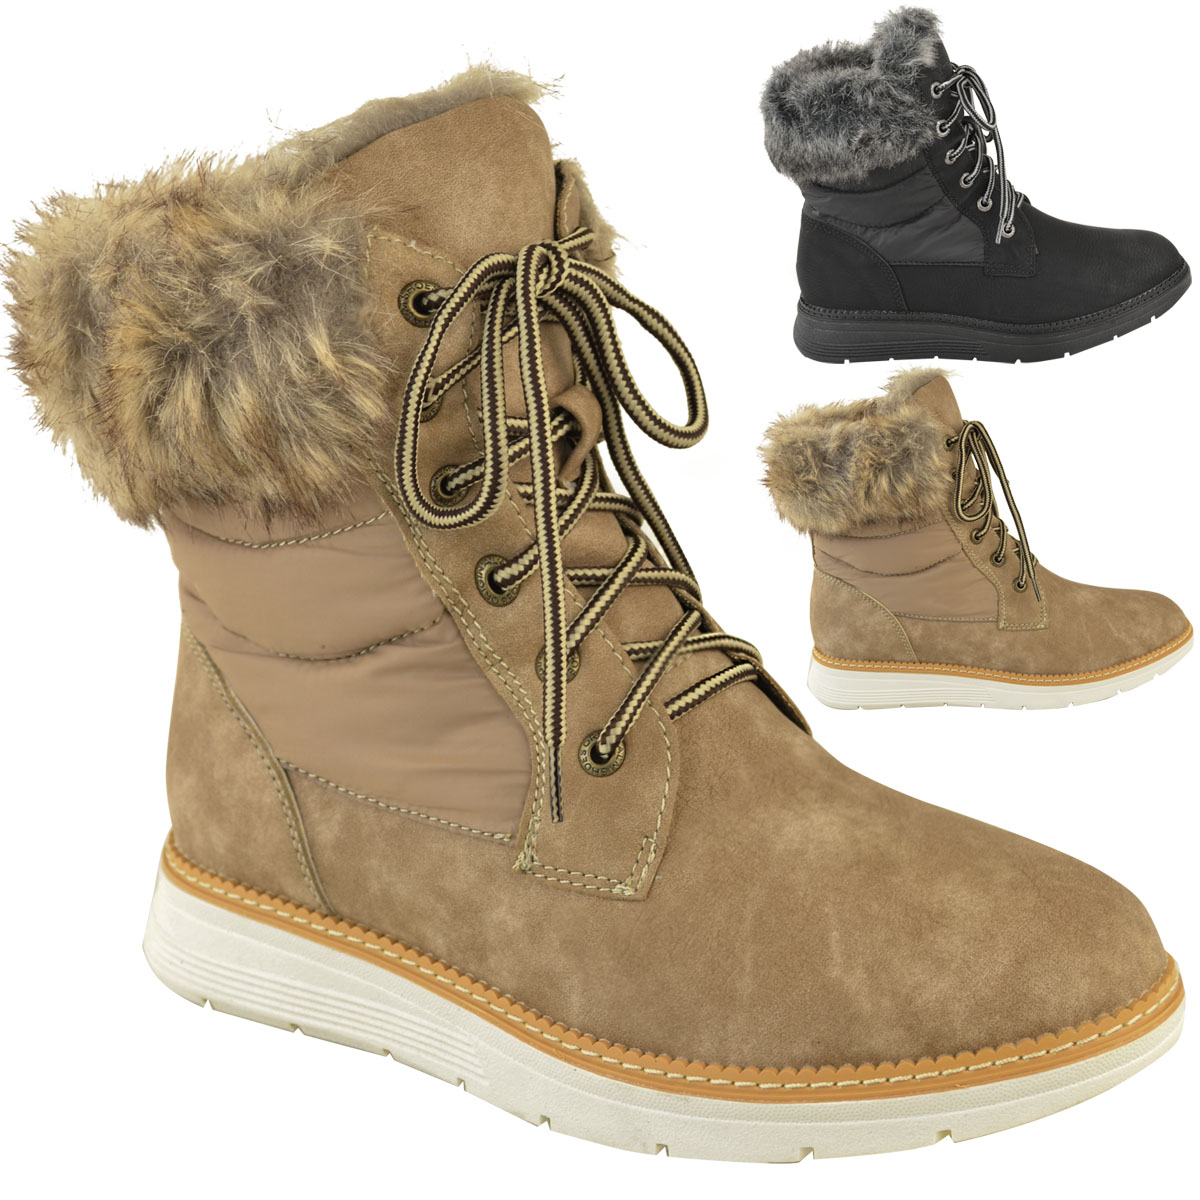 WOMENS WINTER ANKLE BOOTS WARM FUR LINED WALKING COMFOR LACE UP LADIES ...